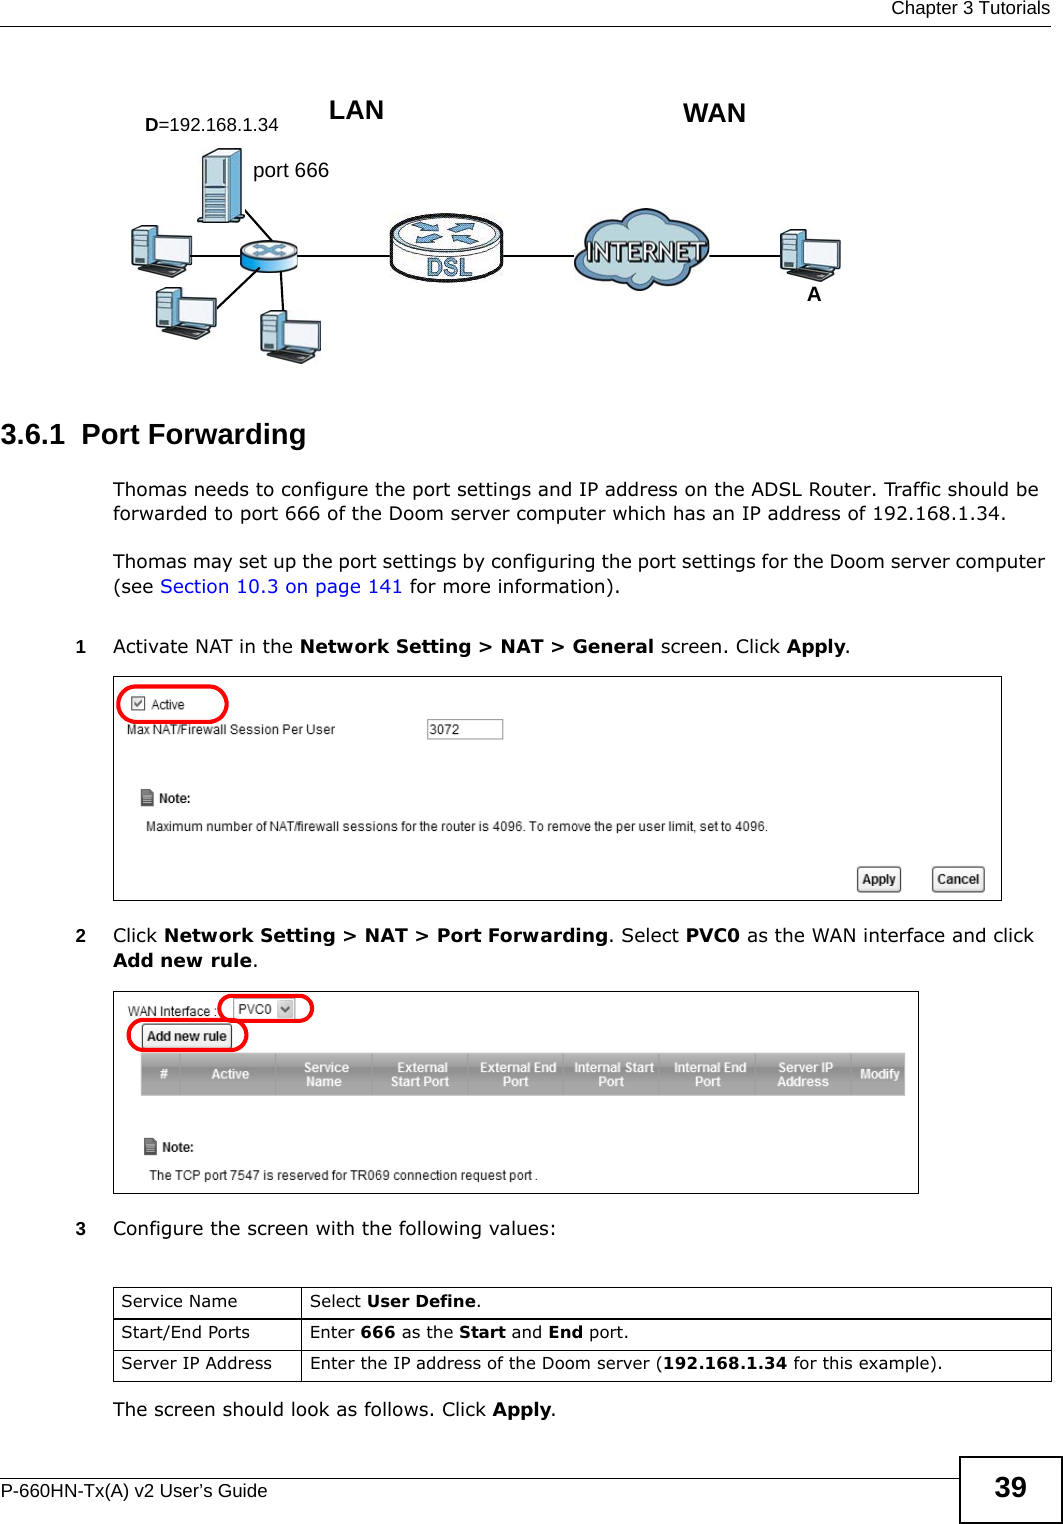  Chapter 3 TutorialsP-660HN-Tx(A) v2 User’s Guide 39Tutorial: NAT Port Forwarding Setup 3.6.1  Port ForwardingThomas needs to configure the port settings and IP address on the ADSL Router. Traffic should be forwarded to port 666 of the Doom server computer which has an IP address of 192.168.1.34.Thomas may set up the port settings by configuring the port settings for the Doom server computer (see Section 10.3 on page 141 for more information).1Activate NAT in the Network Setting &gt; NAT &gt; General screen. Click Apply.2Click Network Setting &gt; NAT &gt; Port Forwarding. Select PVC0 as the WAN interface and click Add new rule.3Configure the screen with the following values:The screen should look as follows. Click Apply.D=192.168.1.34 WANLANport 666AService Name Select User Define.Start/End Ports Enter 666 as the Start and End port.Server IP Address Enter the IP address of the Doom server (192.168.1.34 for this example).